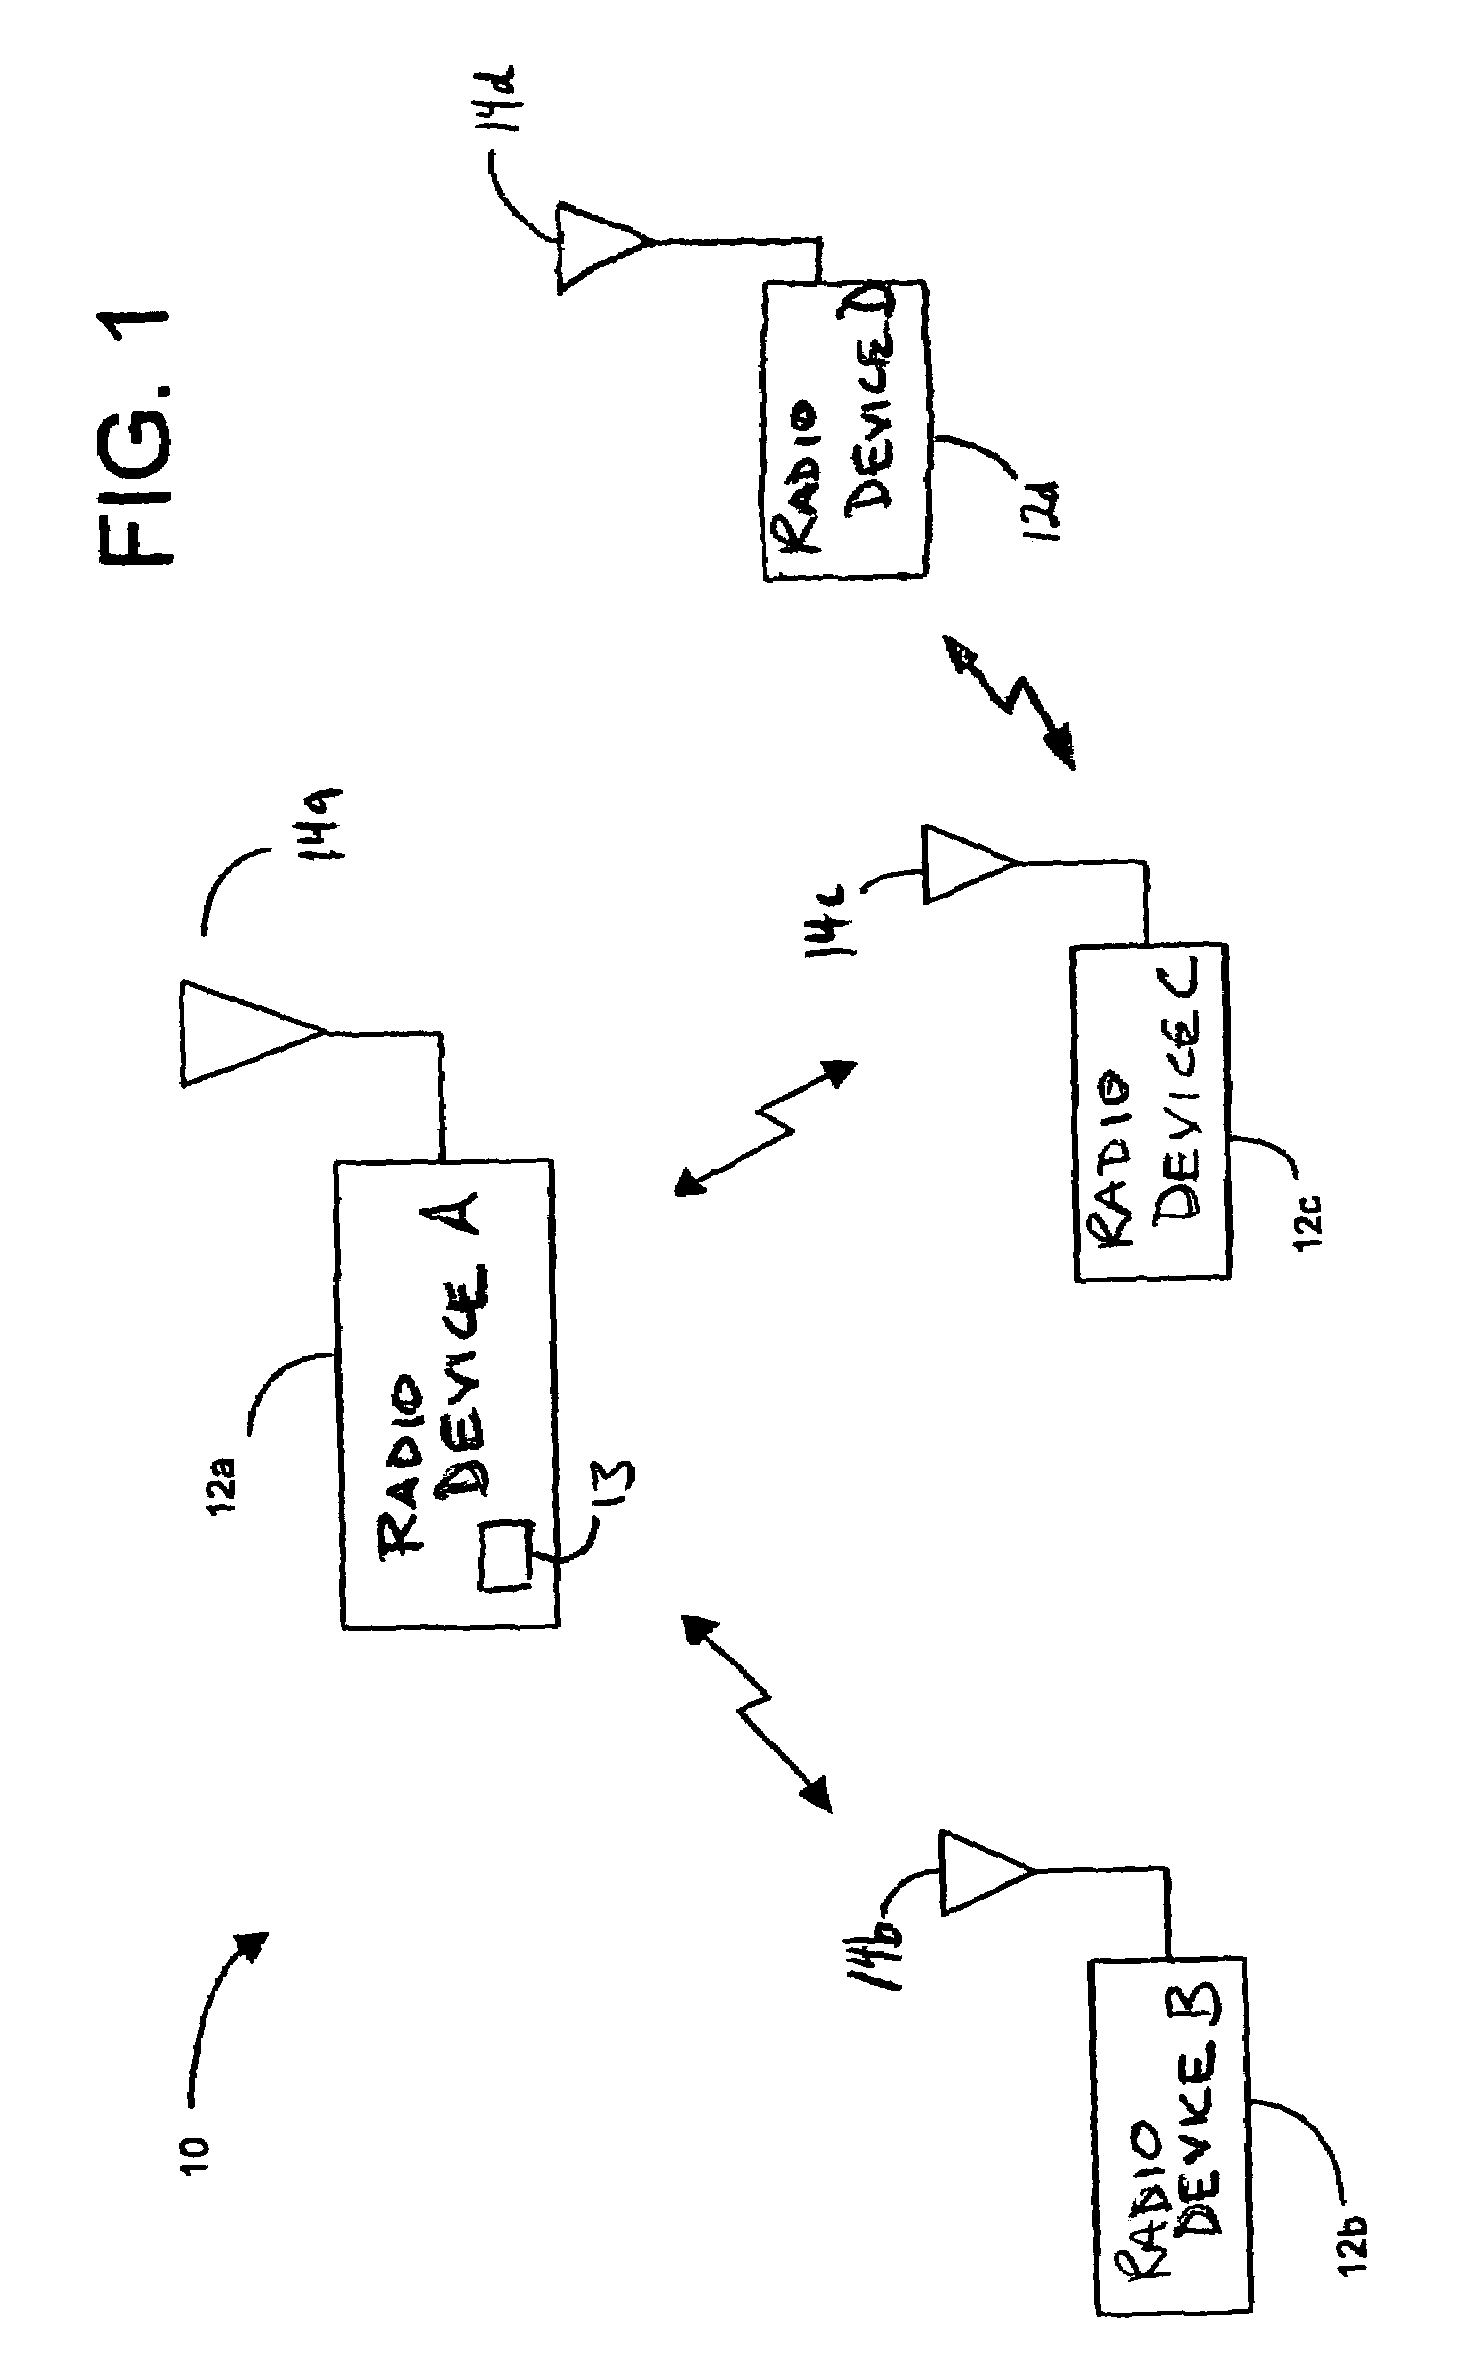 Wireless TDMA system and method for network communications